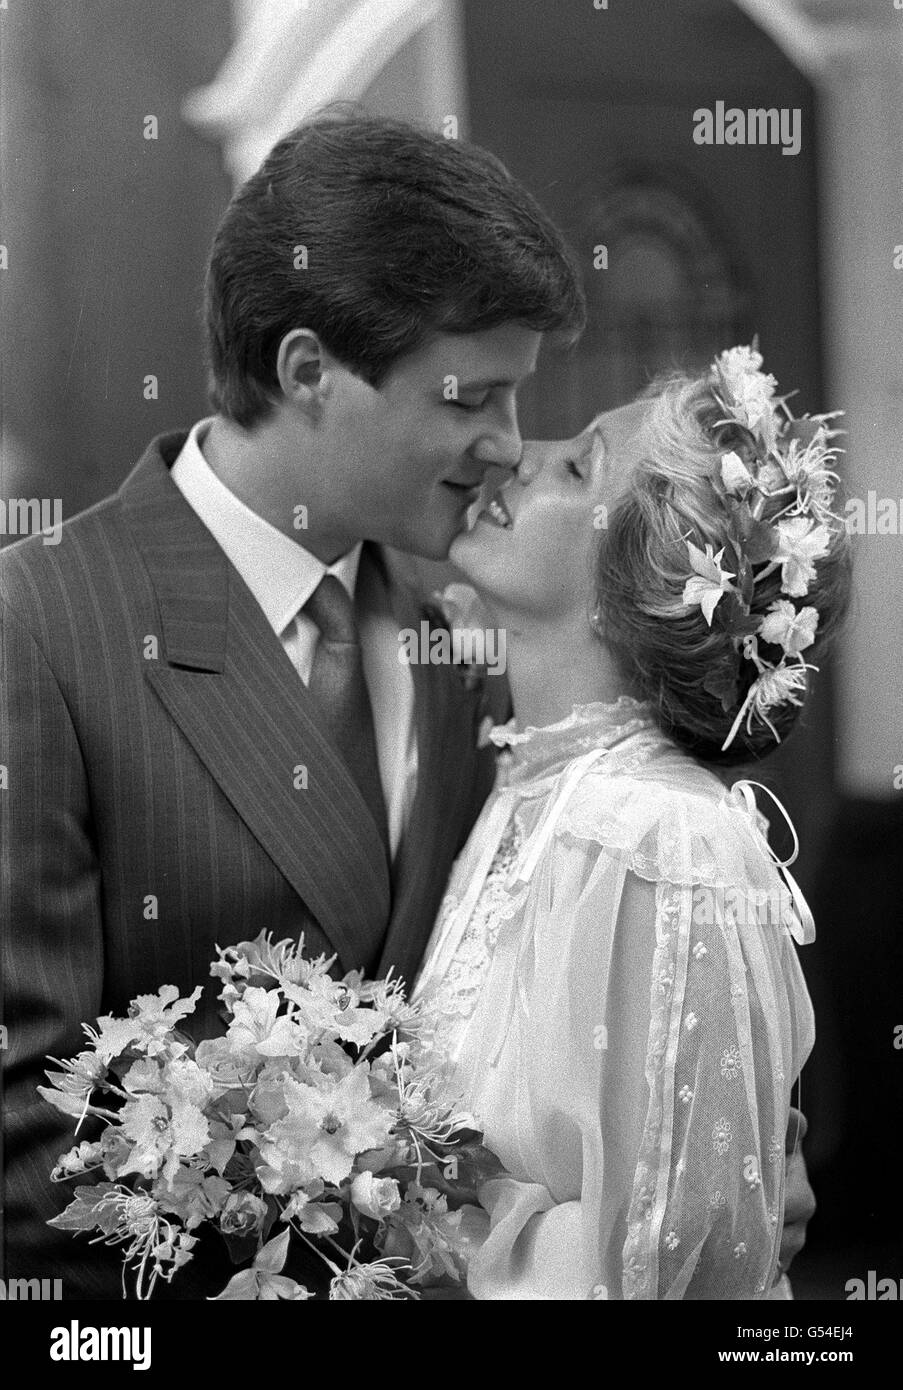 PA Photo 22/6/1985 Actor Ian Sharrock with his bride TV publicity girl Pamela McDonald after their wedding ceremony at Leeds Roman Catholic Cathedral Stock Photo